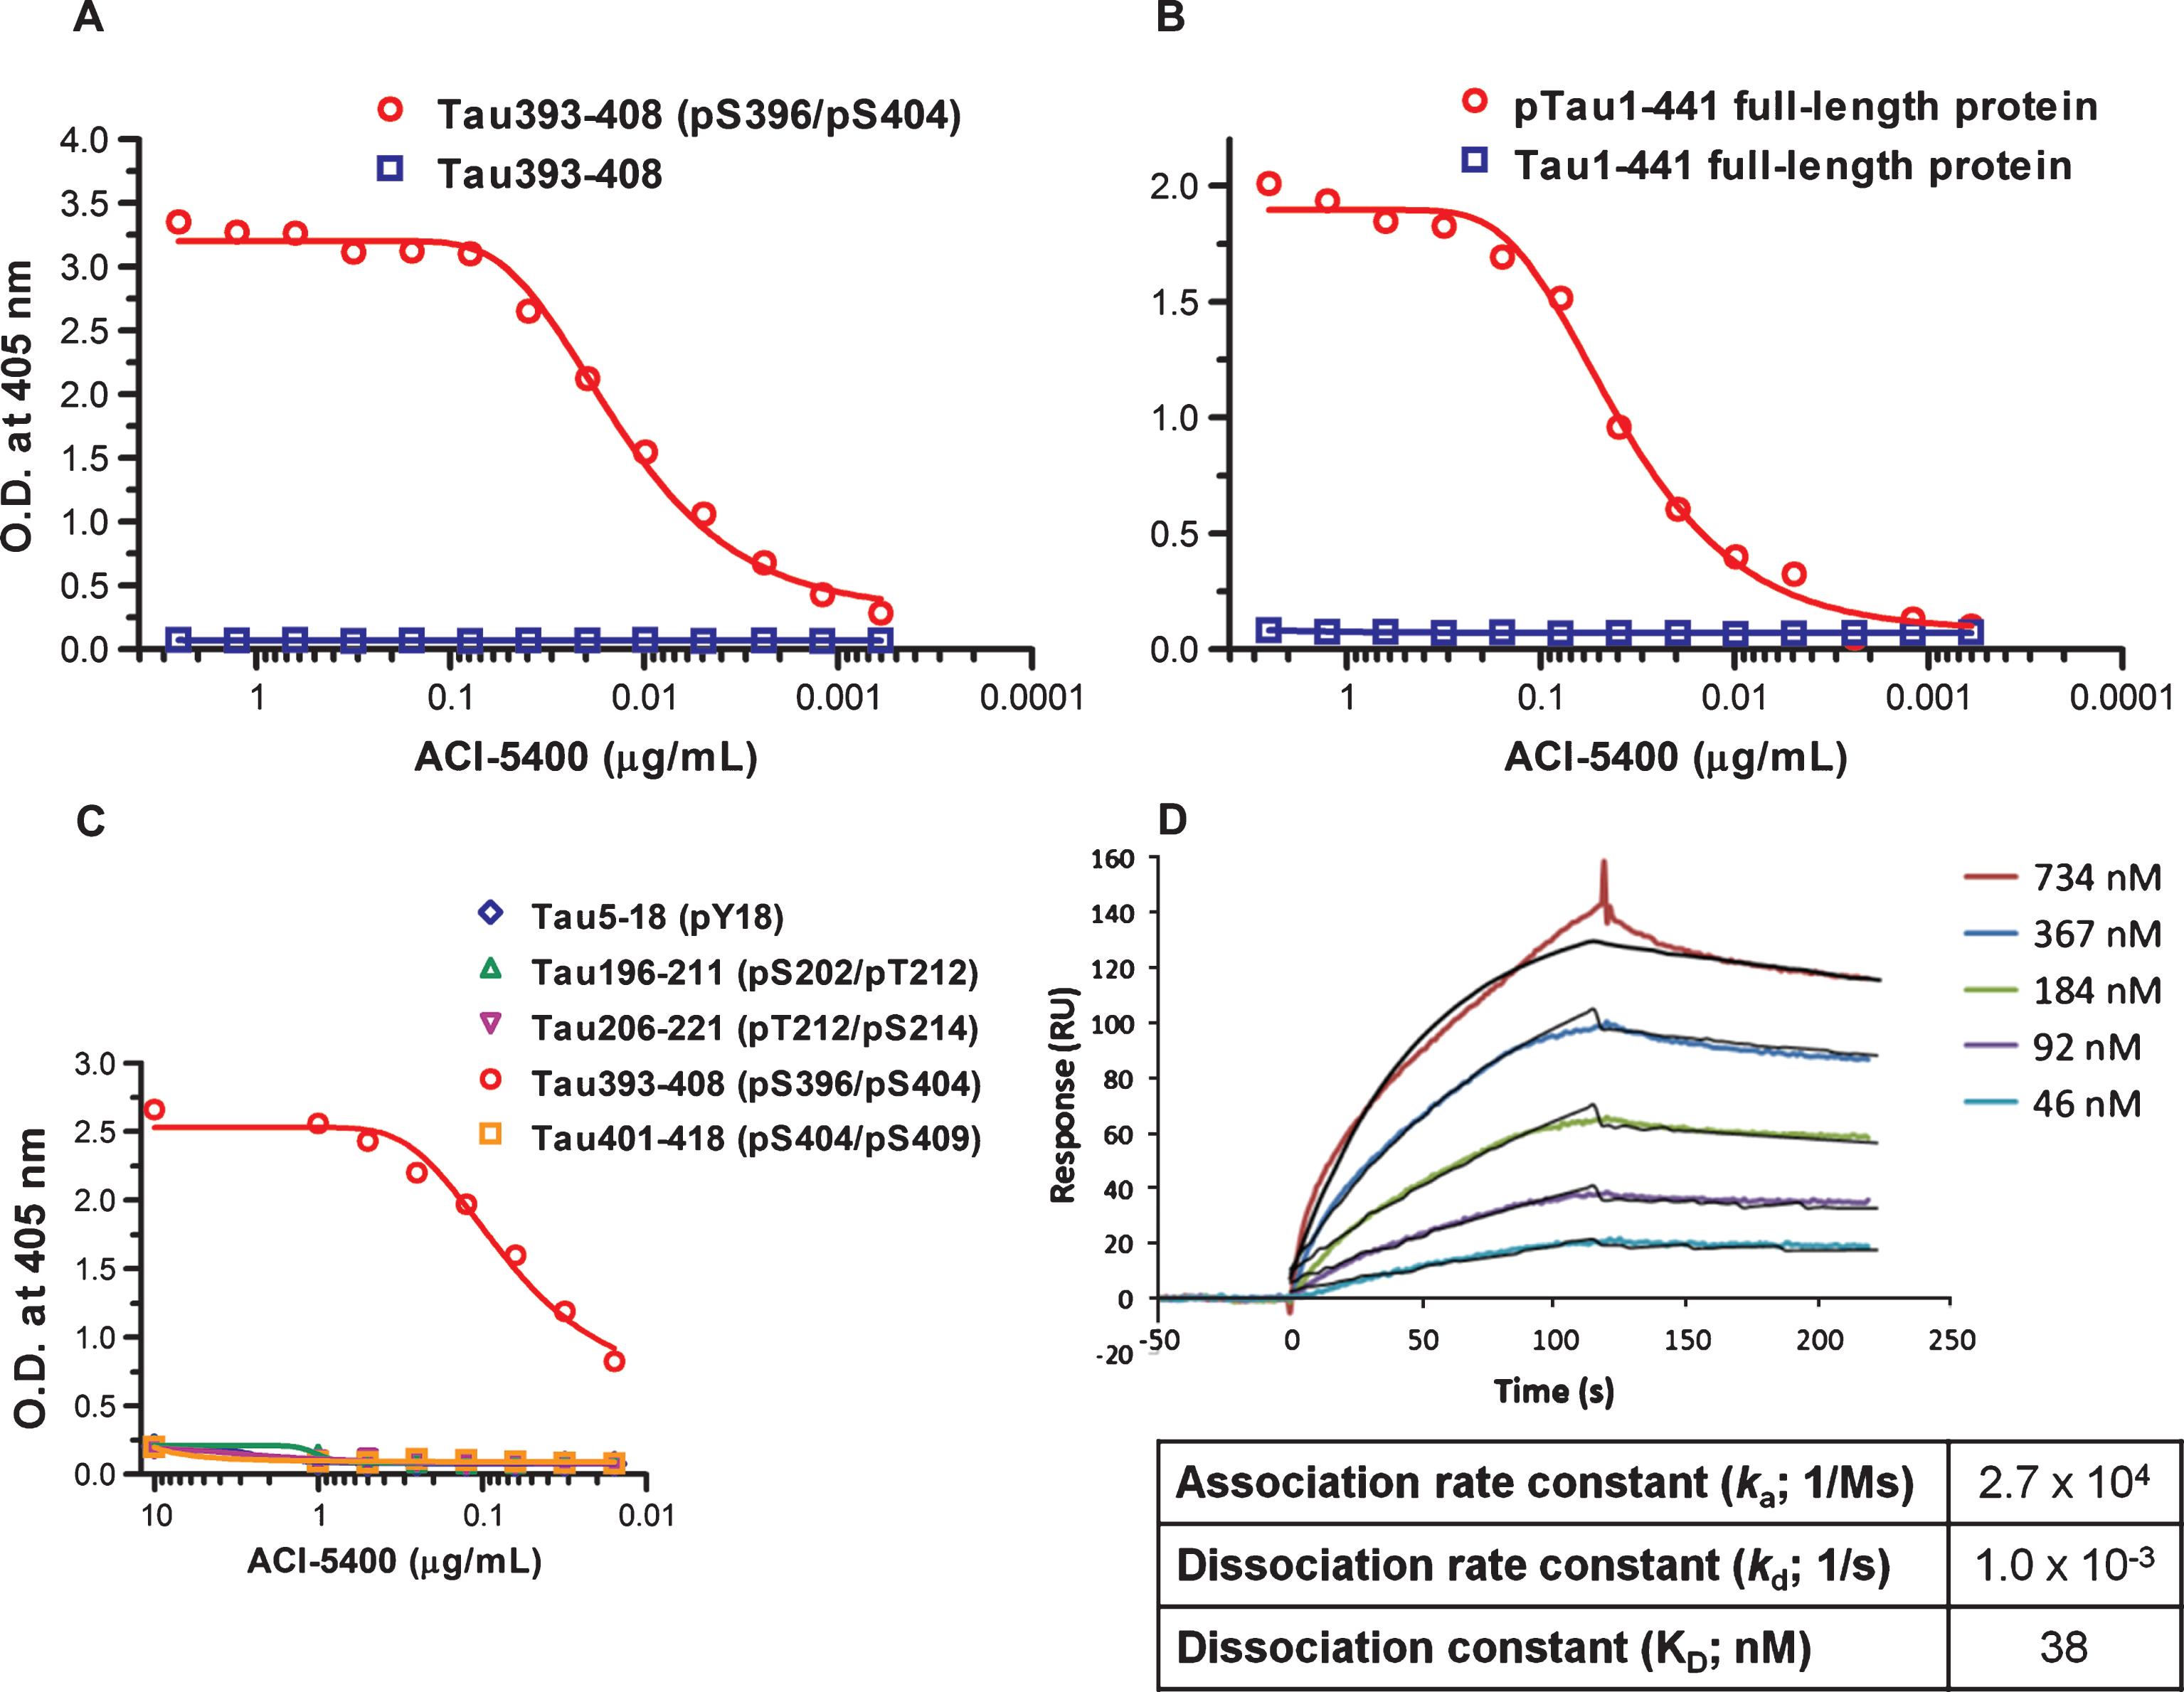 ACI-5400 reacts selectively with phosphorylated Tau protein and peptide in ELISA and Surface Plasmon Resonance. ELISA with increasing concentrations of ACI-5400 revealed the selectivity of the antibody for the phosphorylated form of the synthetic Tau393–408 (pS396/pS404) peptide (A) and for full-length pTau1-441 protein (B). No binding was observed to the corresponding non-phosphorylated peptide or protein Tau, or peptides corresponding to different Tau phospho sites (C). No binding was detected to the corresponding non-phosphorylated Tau peptides (not shown). Binding of antibody ACI-5400 at different concentrations as indicated, to the immobilized Tau393-408 (pS396/pS404) peptide (D). The colored curves are the SPR sensorgrams, whereas the black curves are fitted using a 1 : 1 Langmuir binding model.